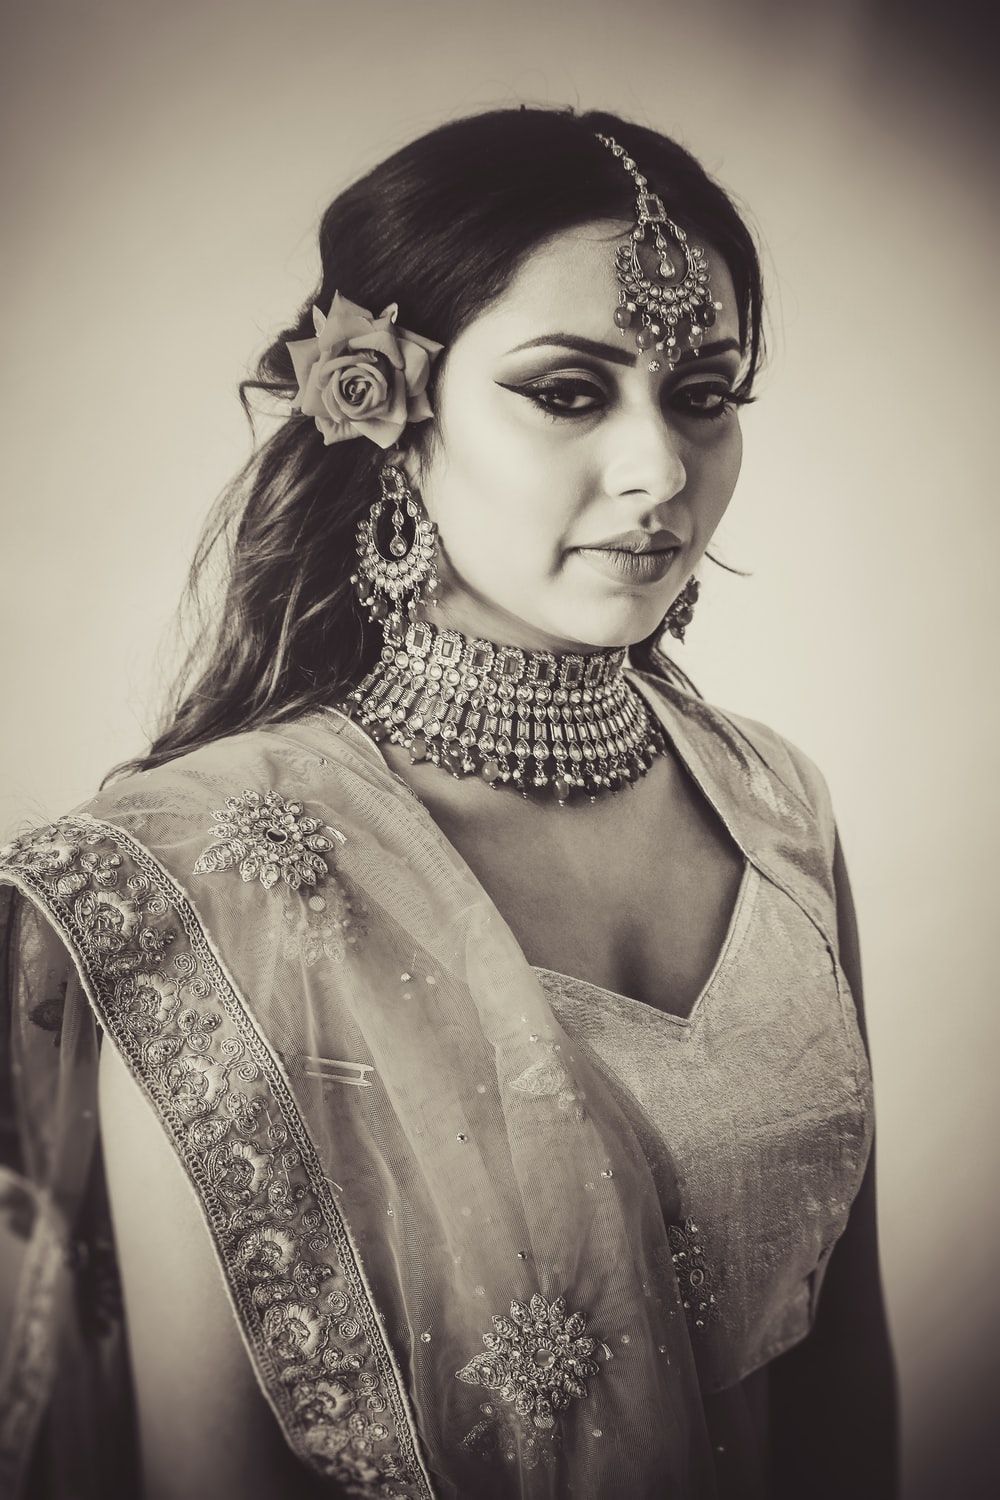 Indian Bride Picture. Download Free Image